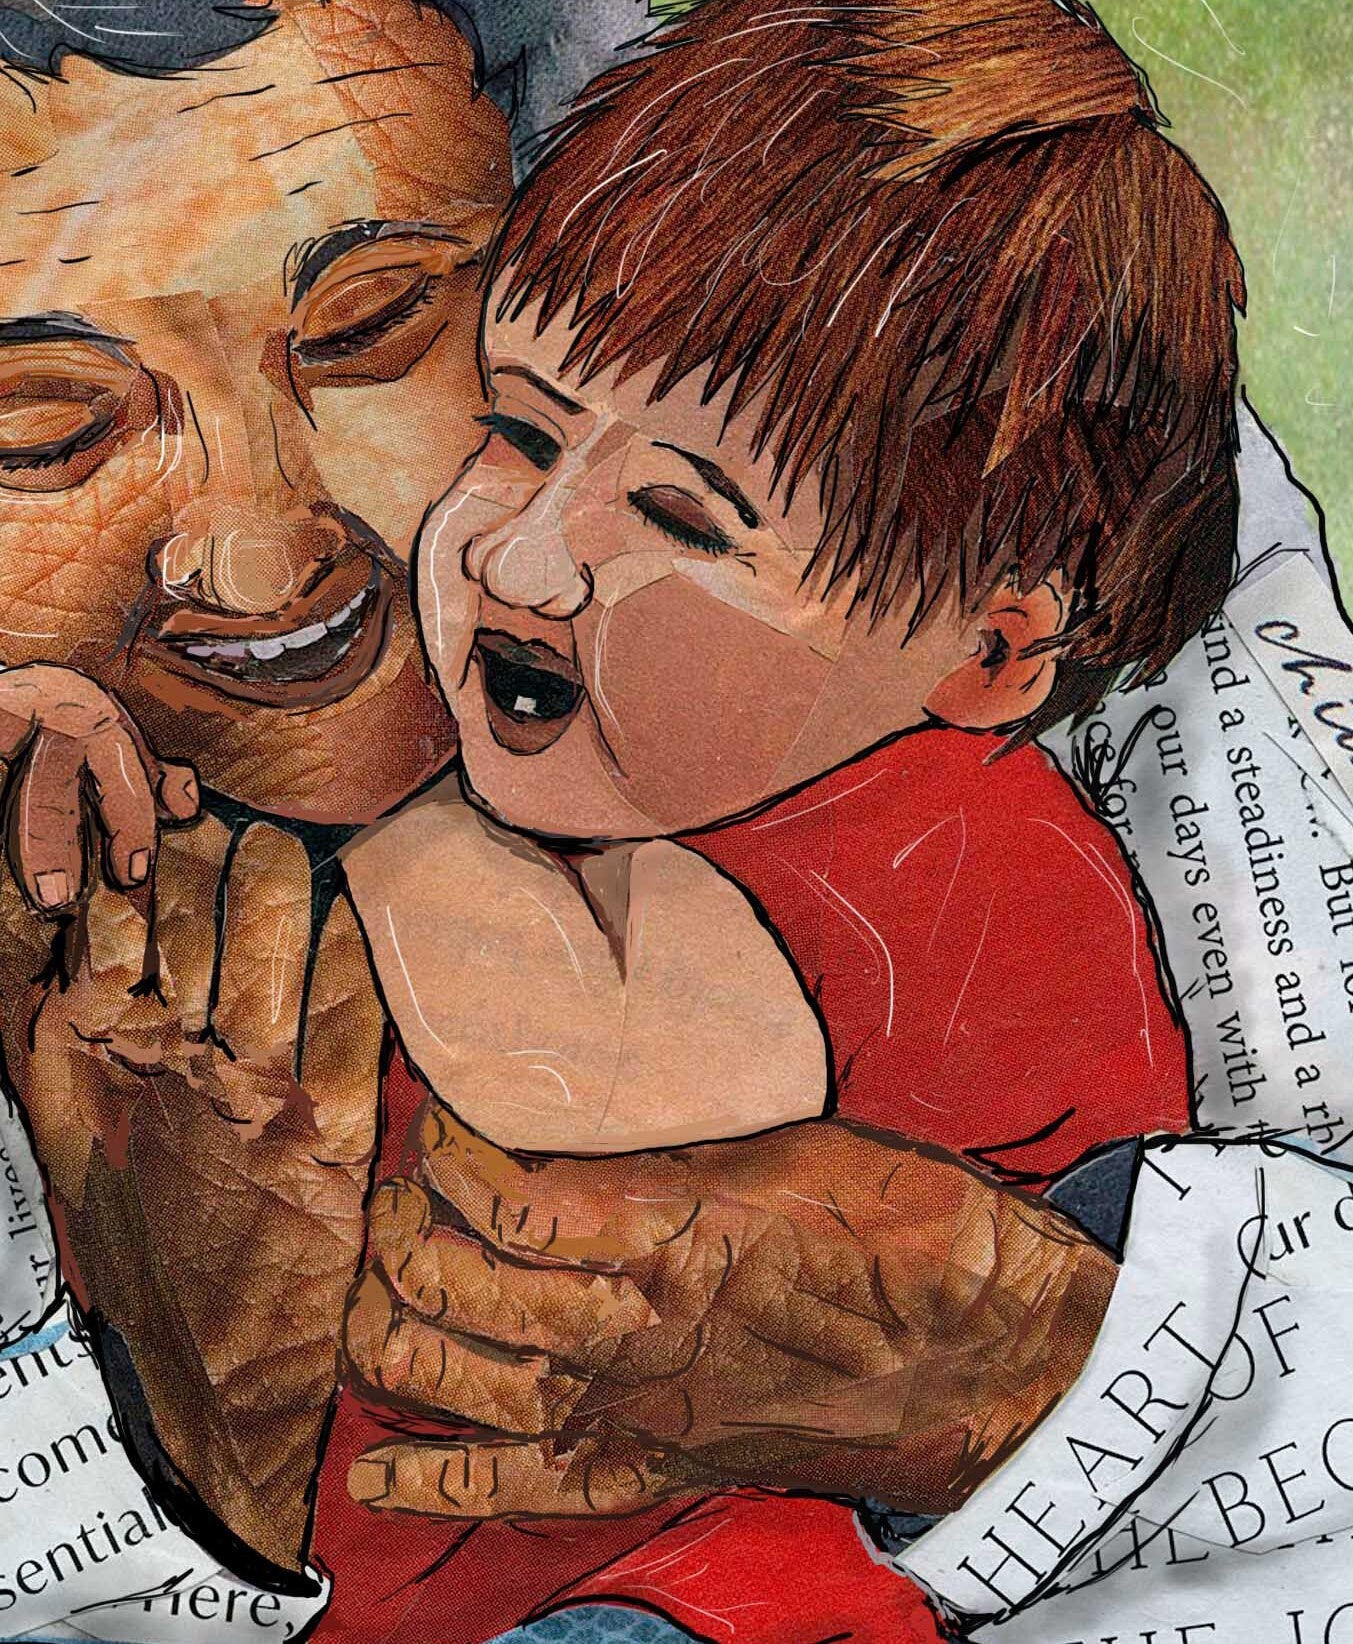 Greeting Card of a Paper Collage of a grandmother hugging a toddler, love, grandma hug, elderly, pandemic art, connection - Blank Inside